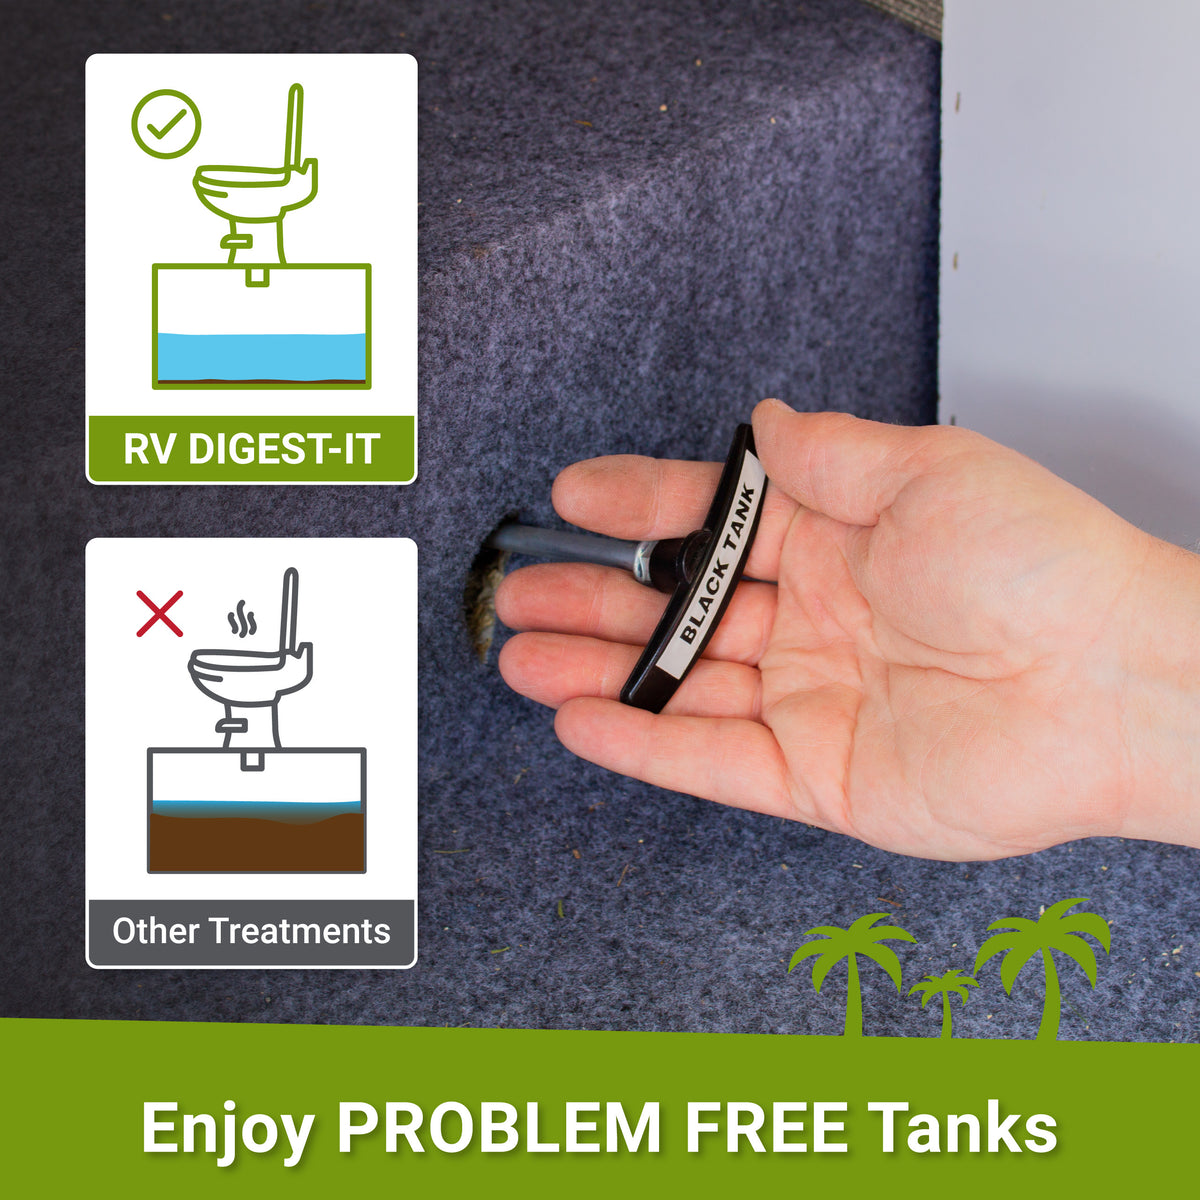 Enjoy problem free holding tanks with a quality waste digester. RV Digest-It Holding Tank Treatment